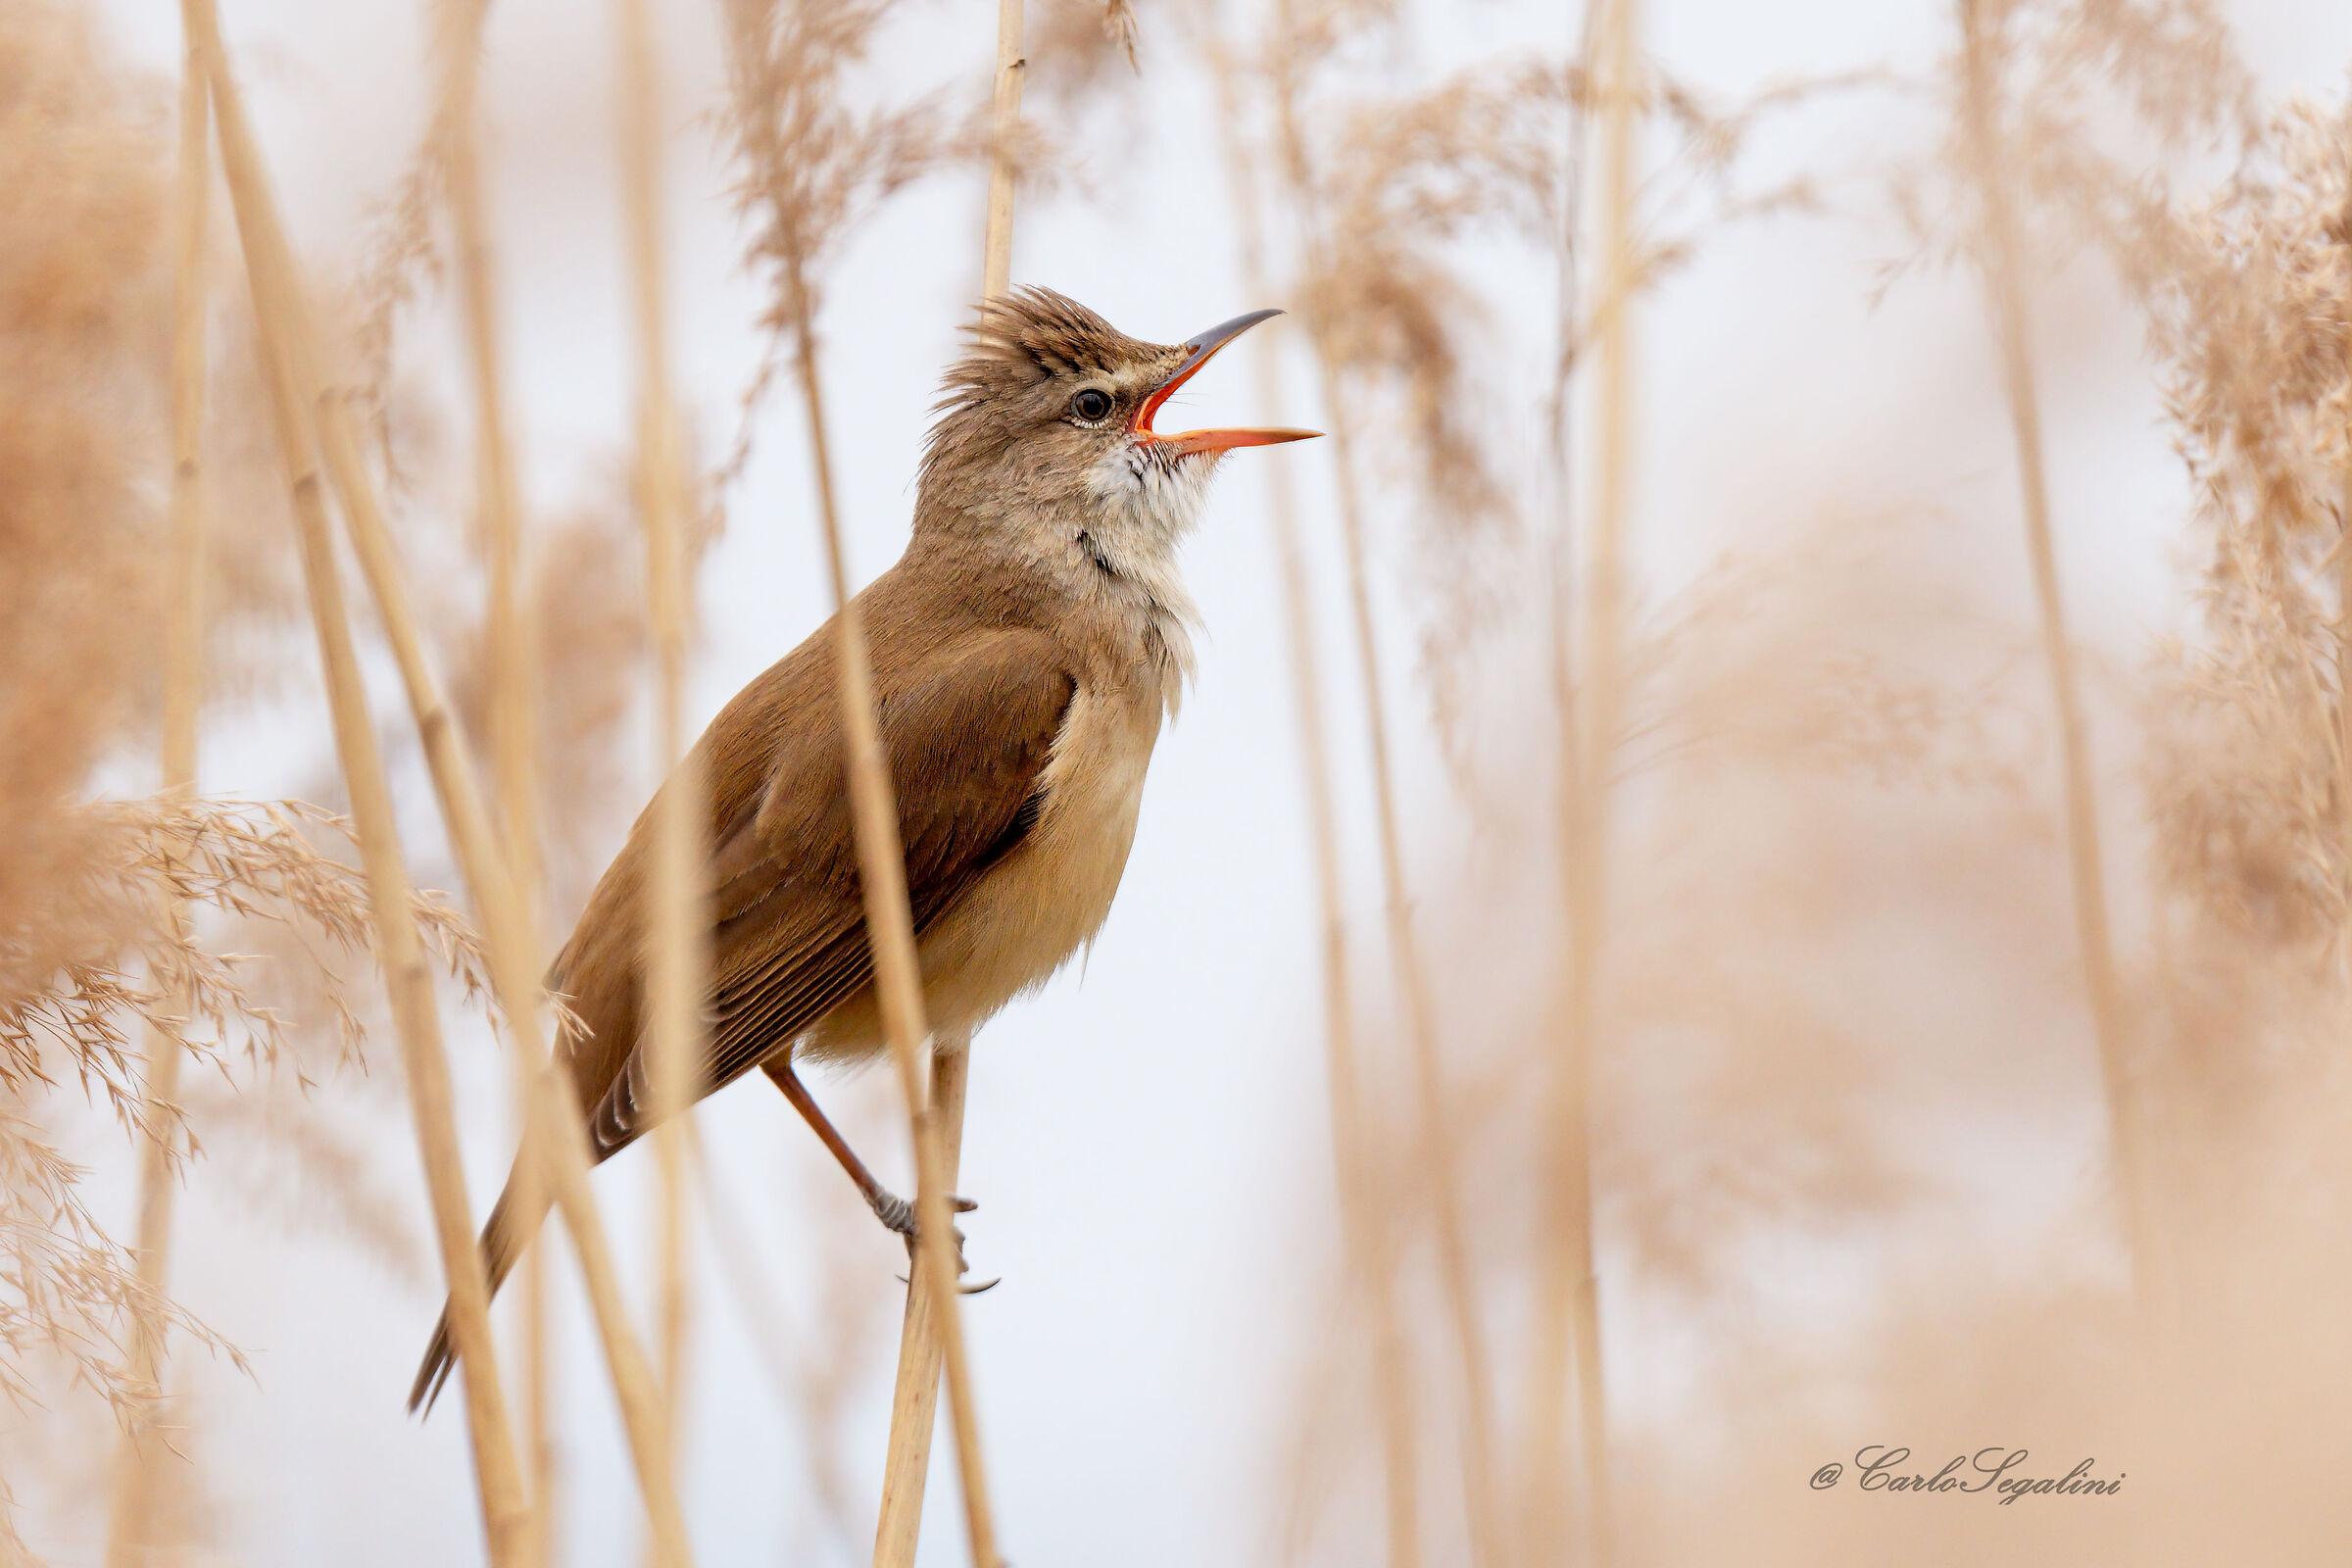 The soloist of the reeds...